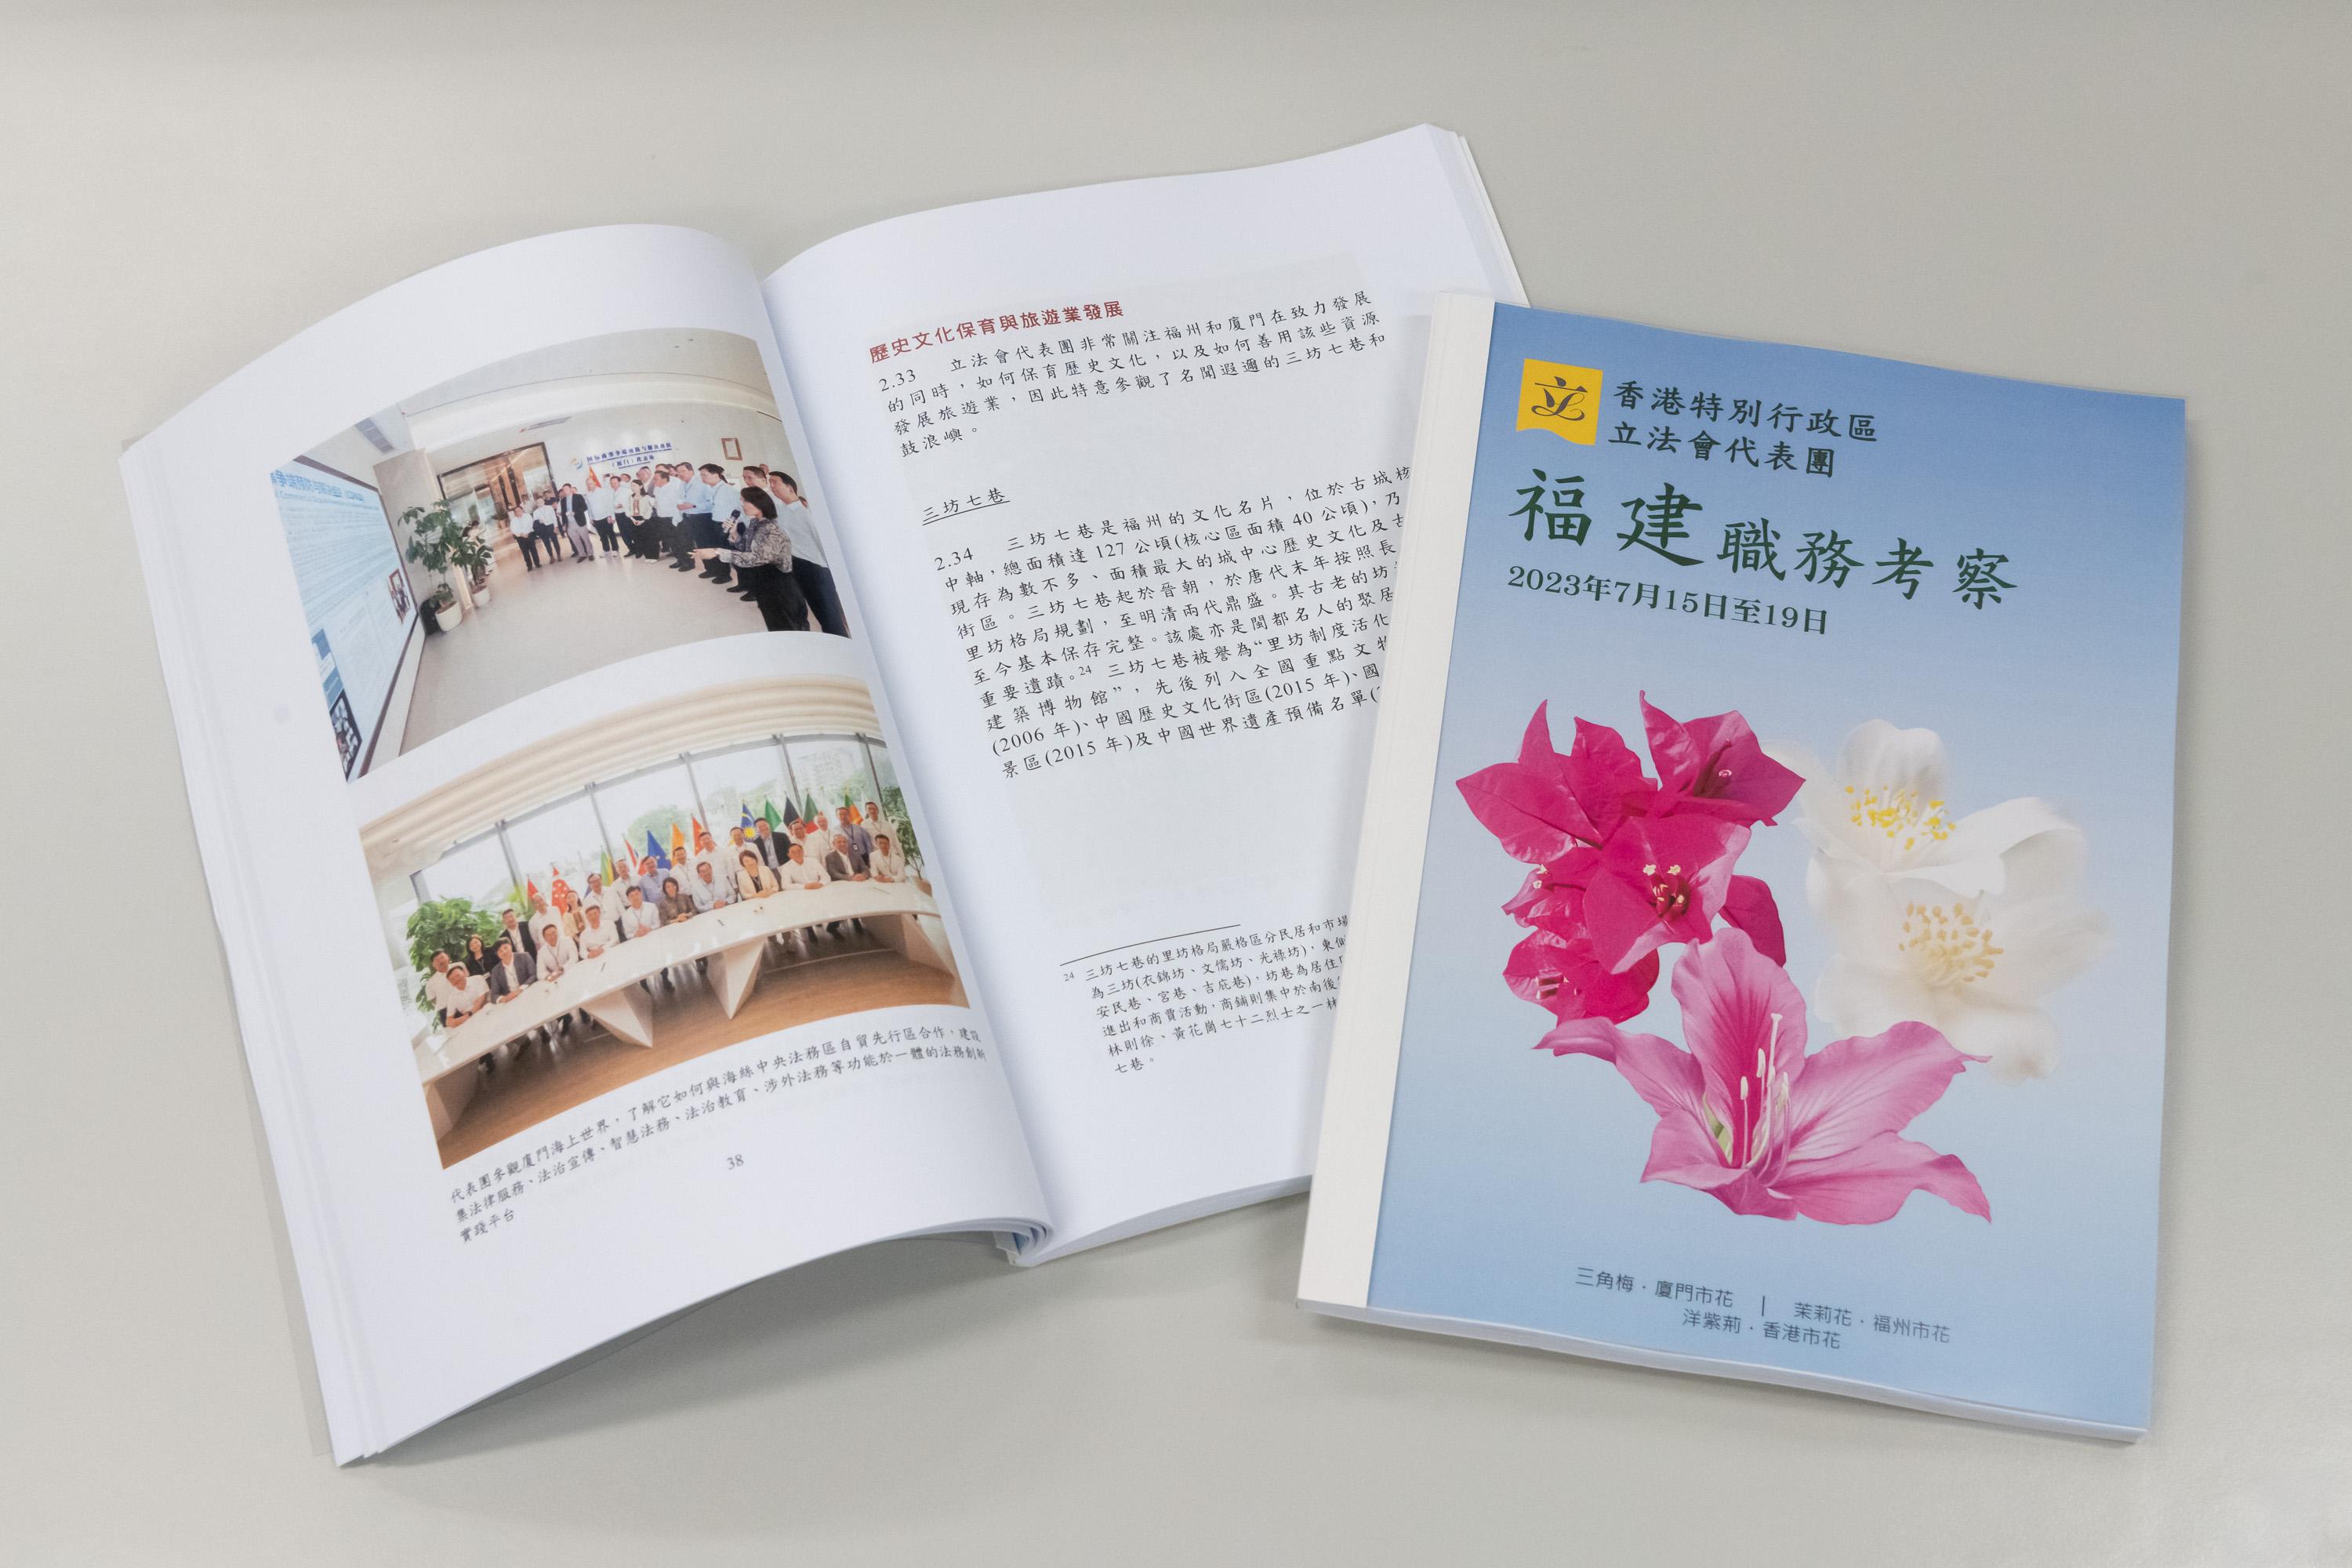 The Legislative Council delegation releases the report on the study visit to Fujian today (October 10). Photo shows the report on the study visit to Fujian.